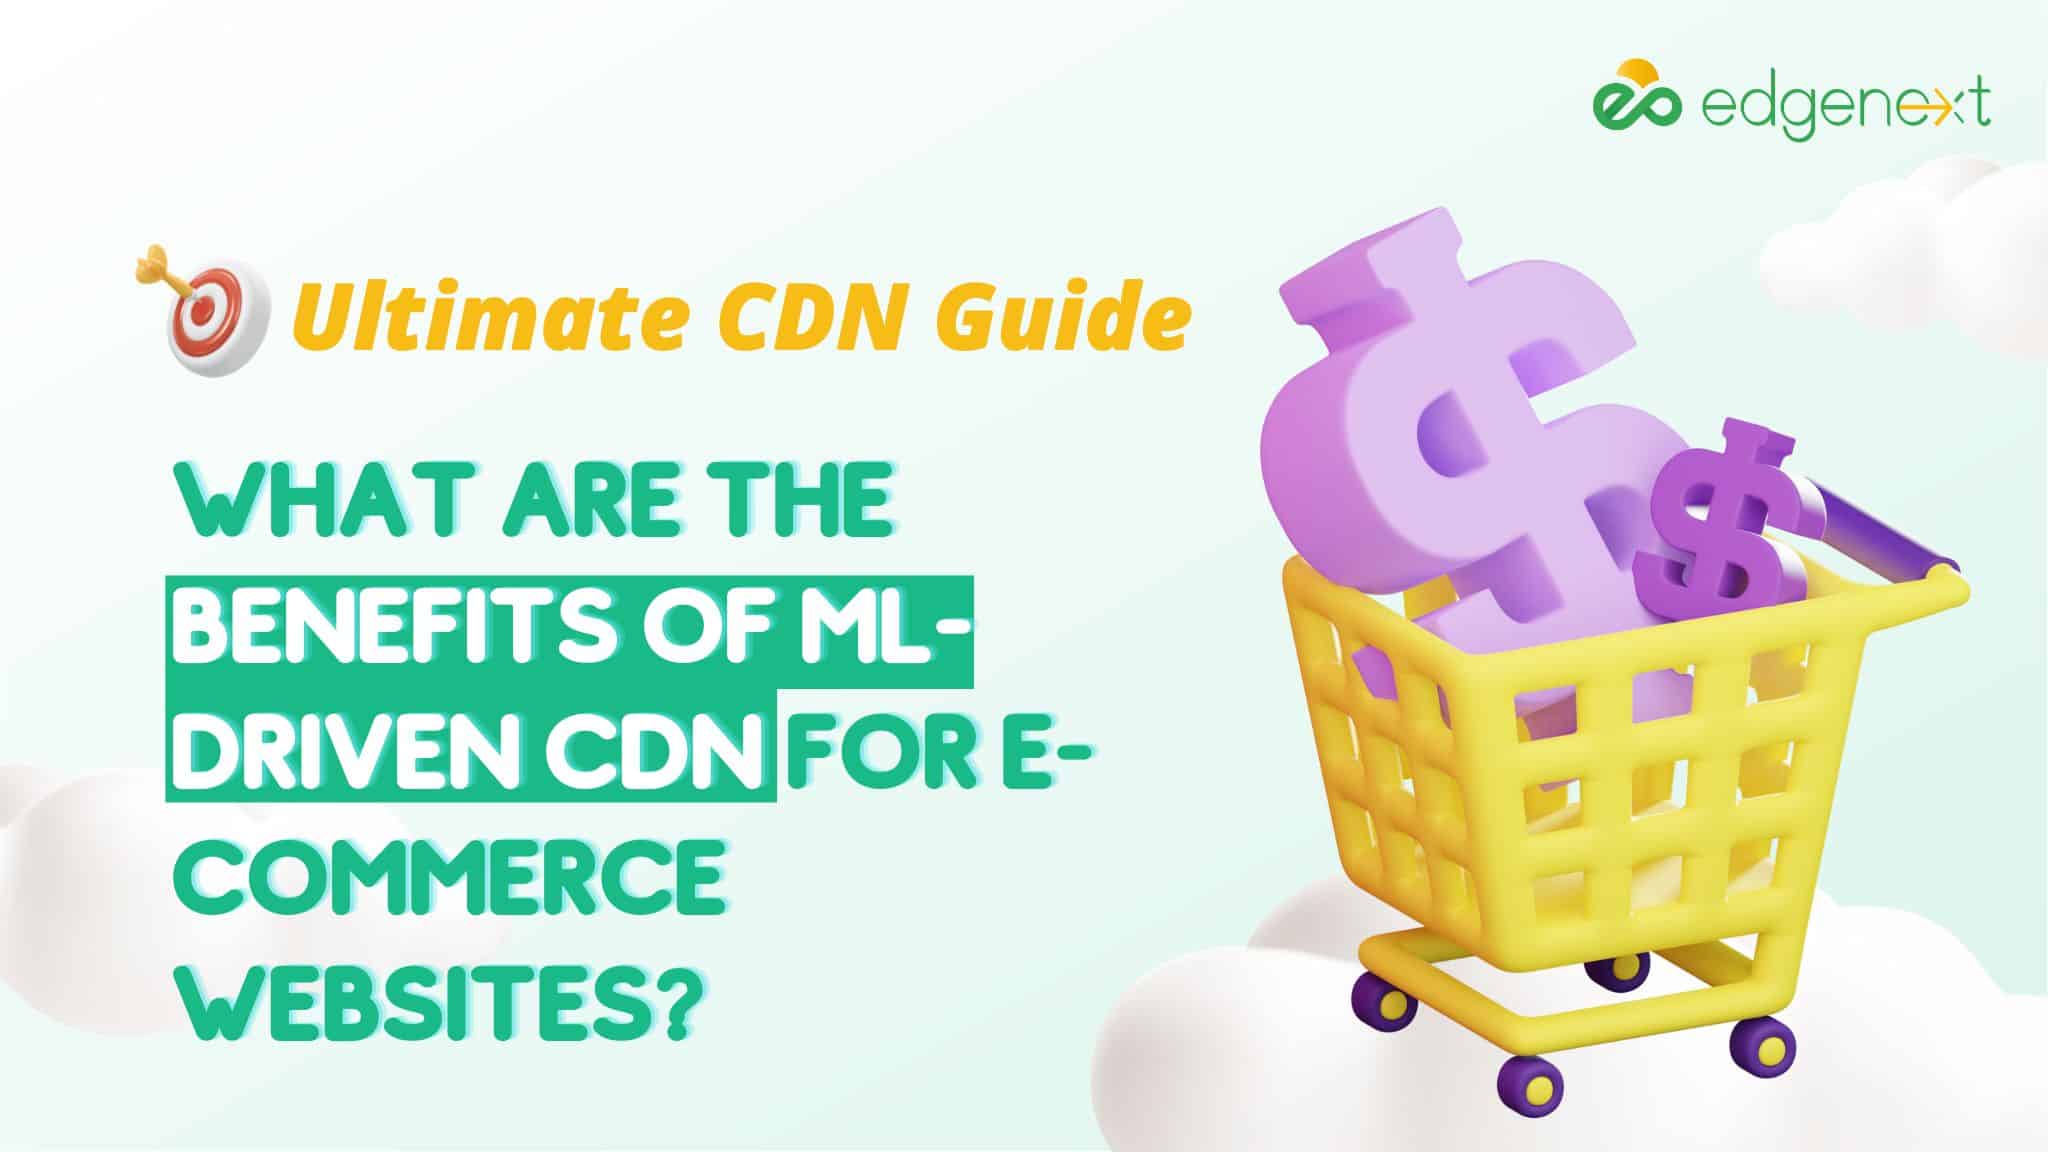 What are the Benefits of ML-driven CDN for E-commerce Websites?